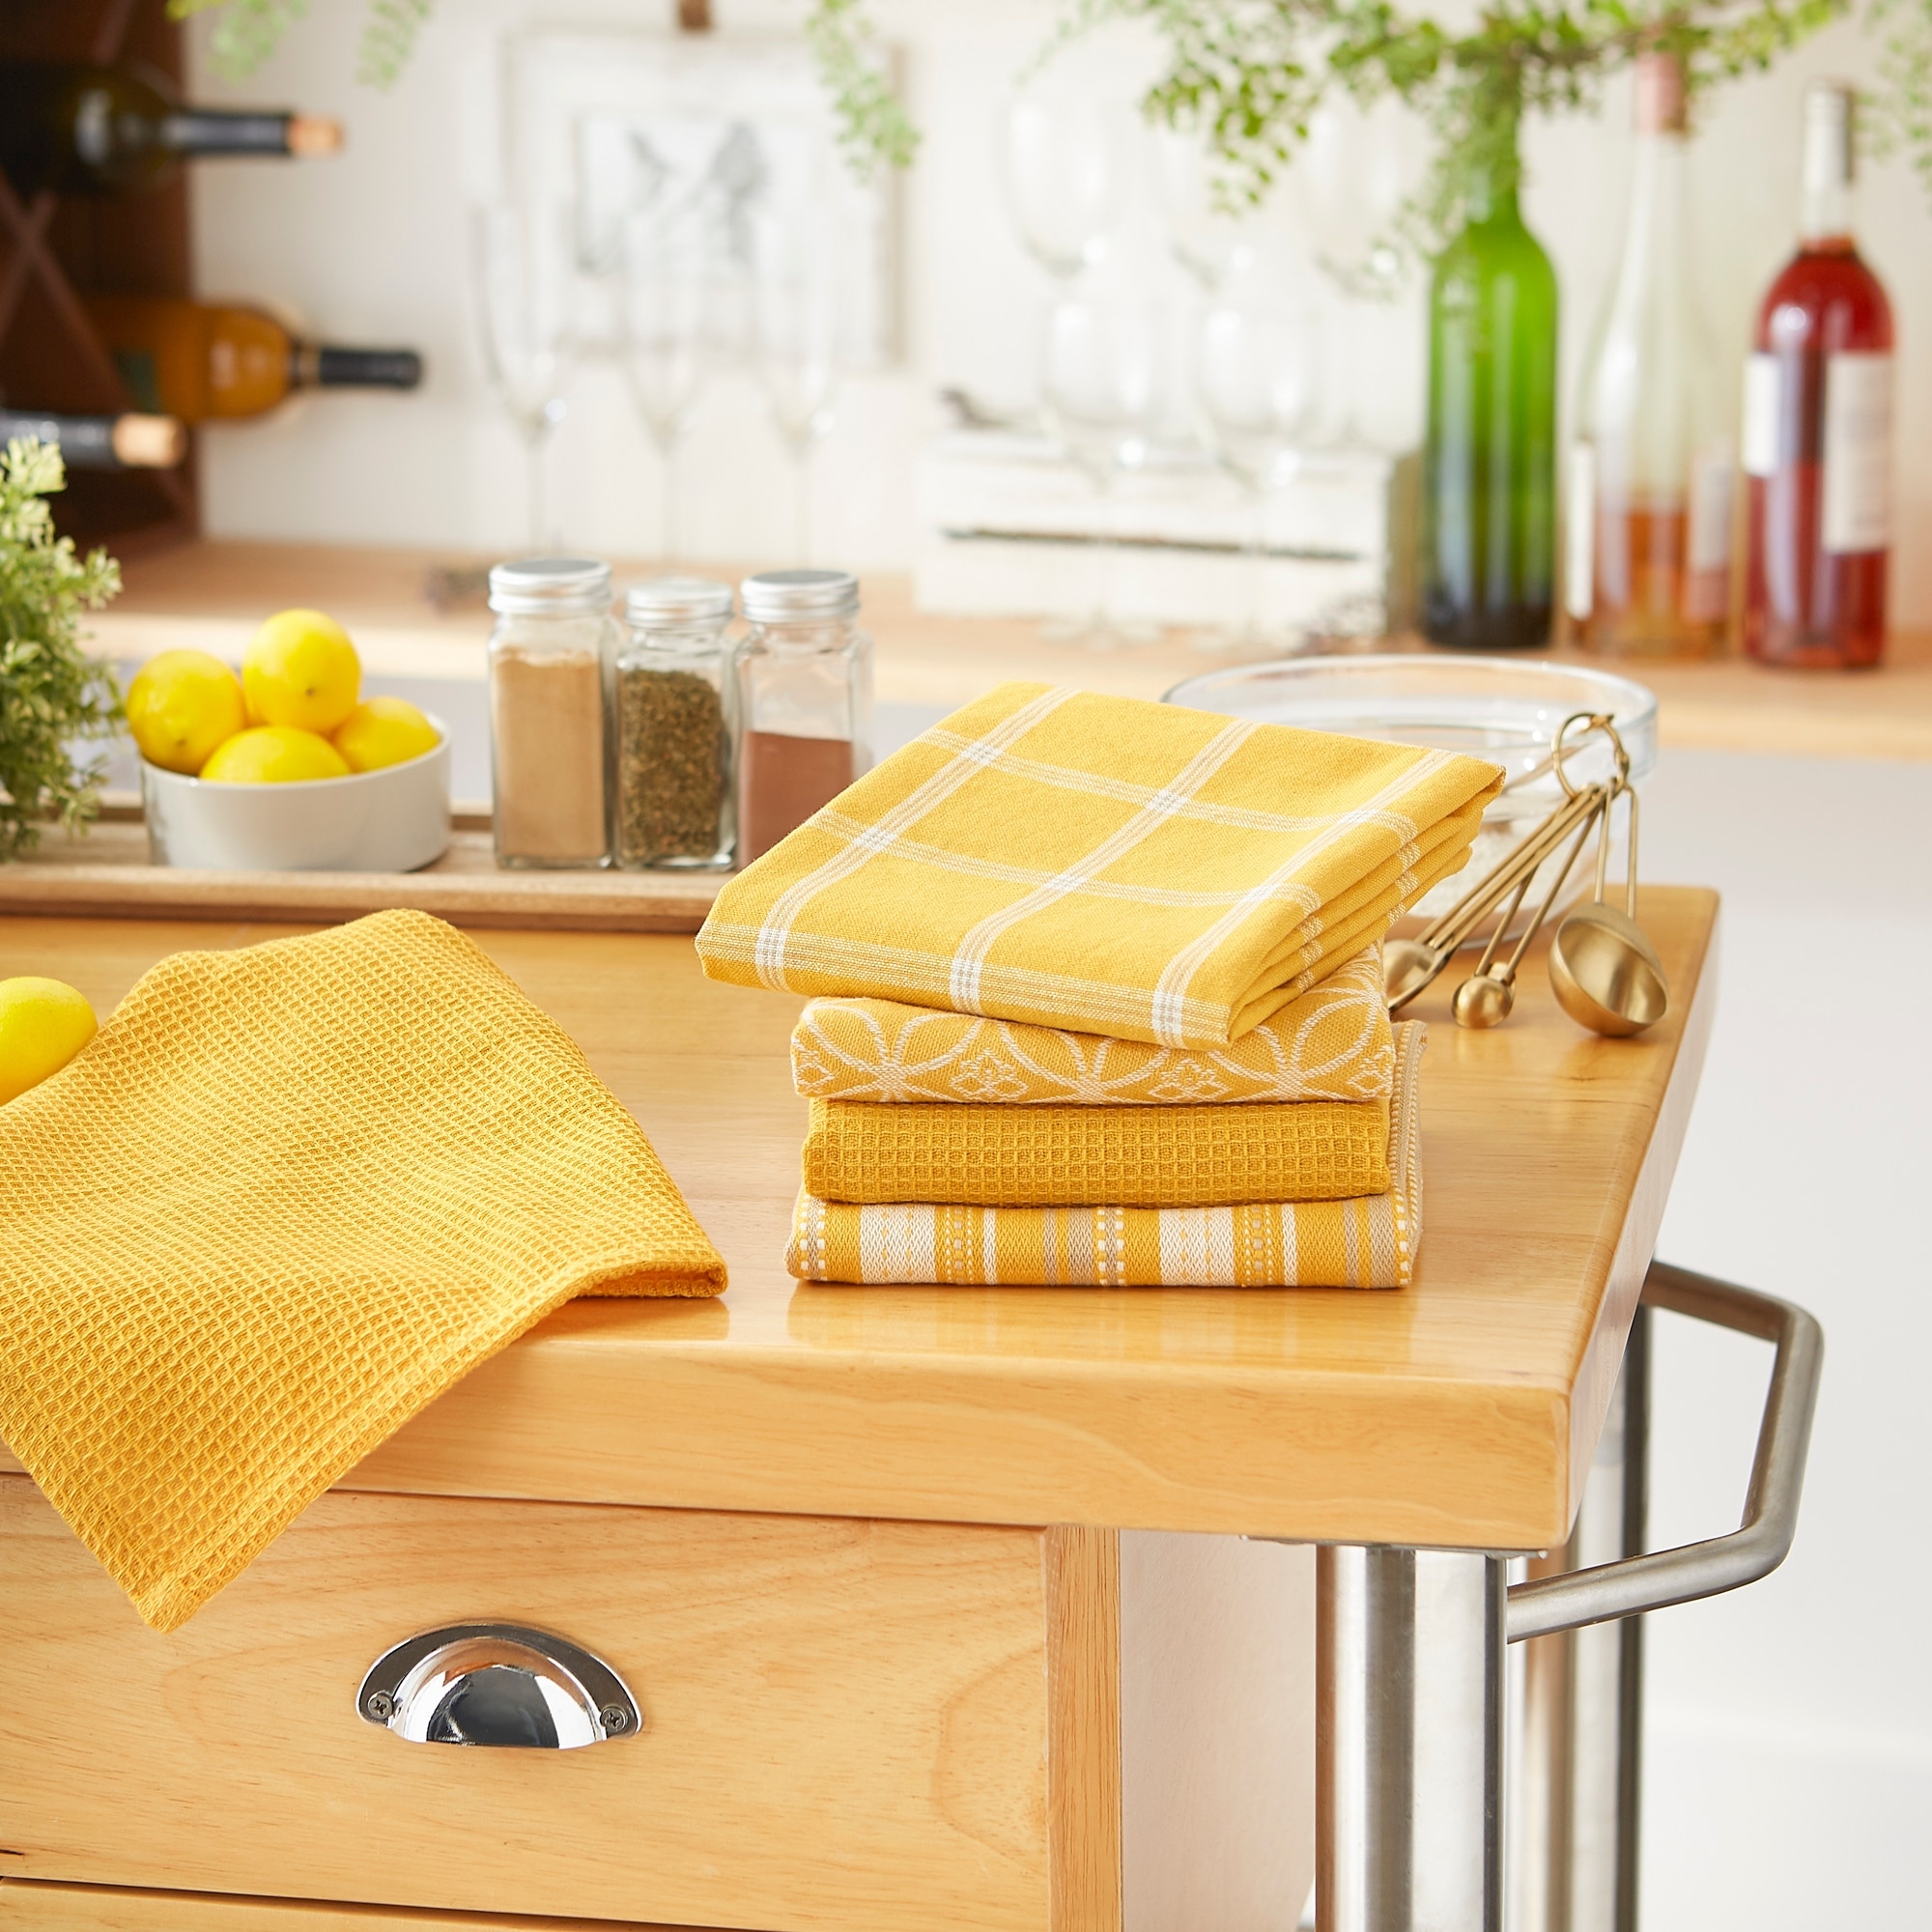 New Set of 2 Ultra All-Clad Kitchen Dish Towels Yellow (Color: Butterscotch)